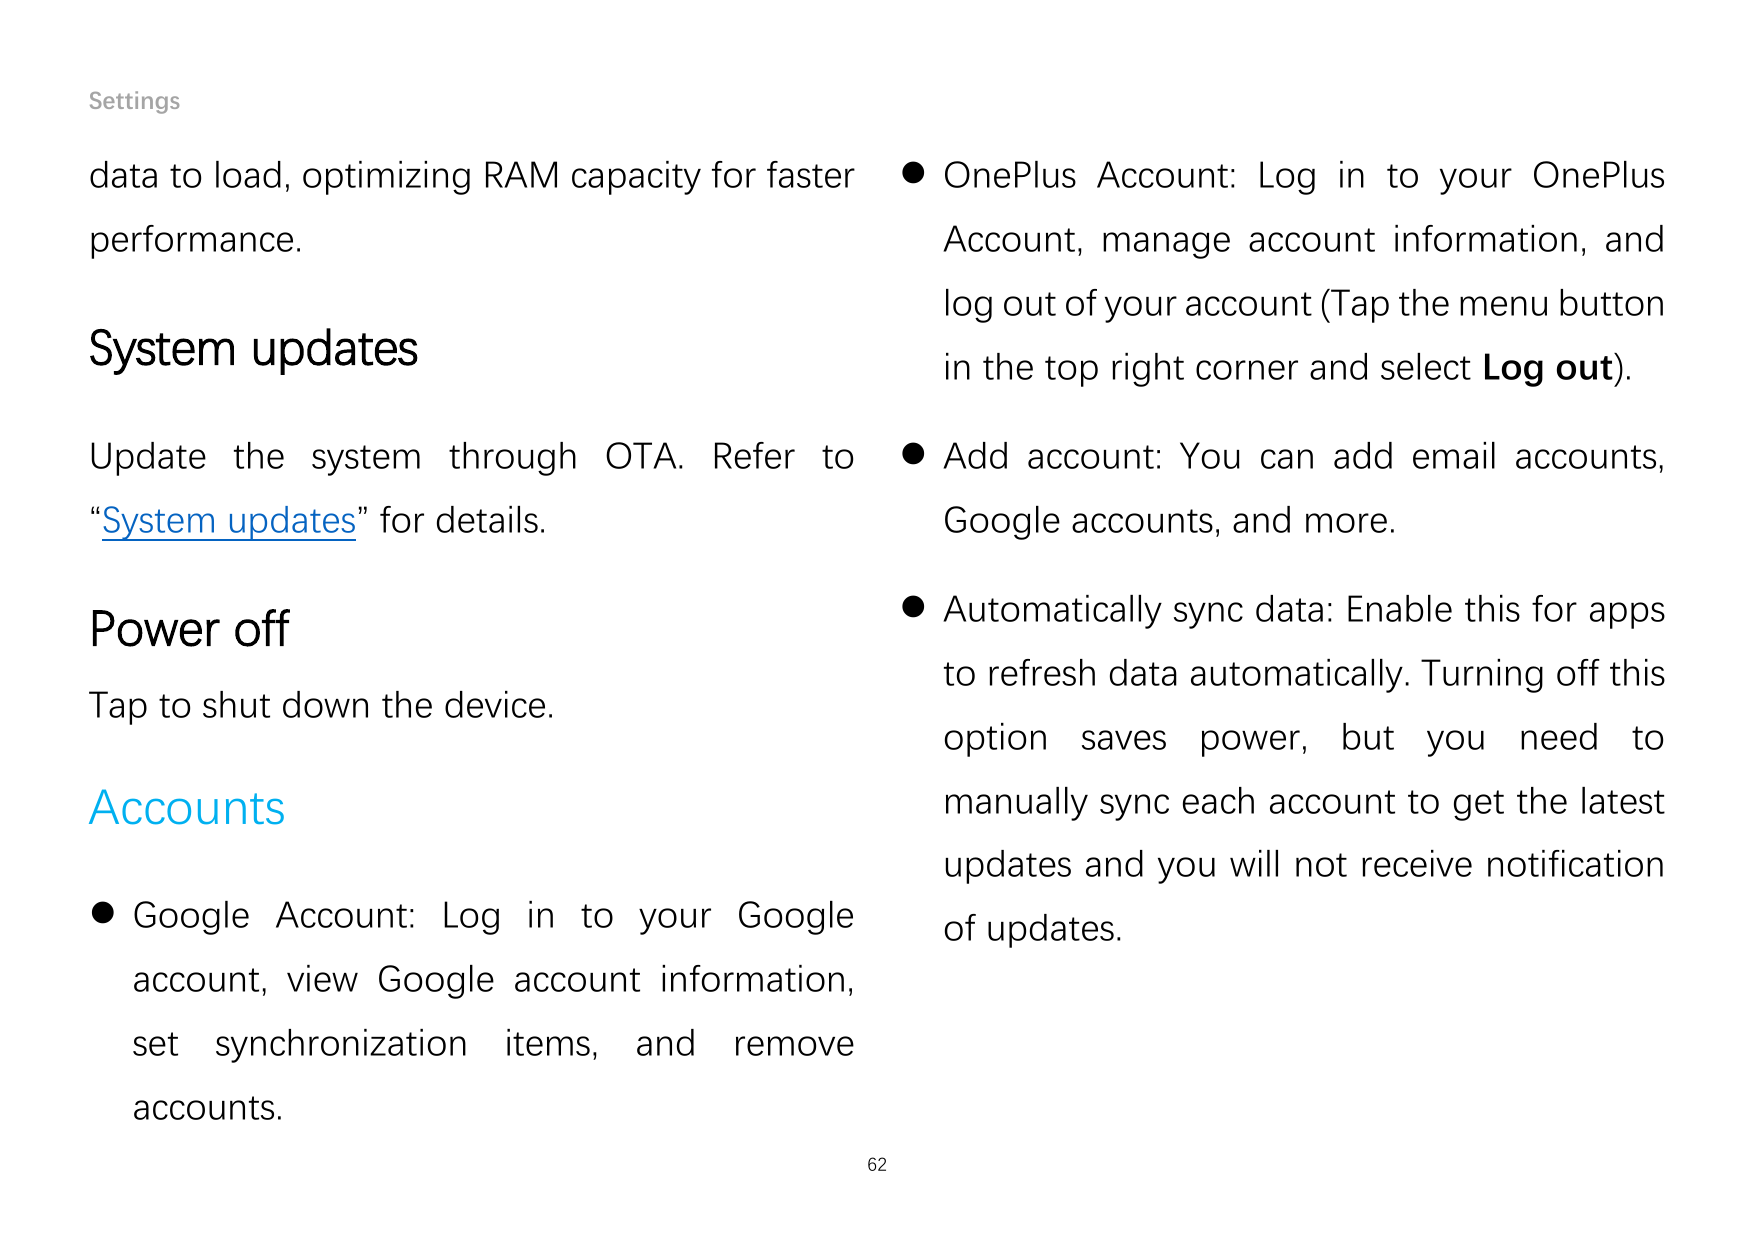 Settings OnePlus Account: Log in to your OnePlusdata to load, optimizing RAM capacity for fasterperformance.Account, manage acc